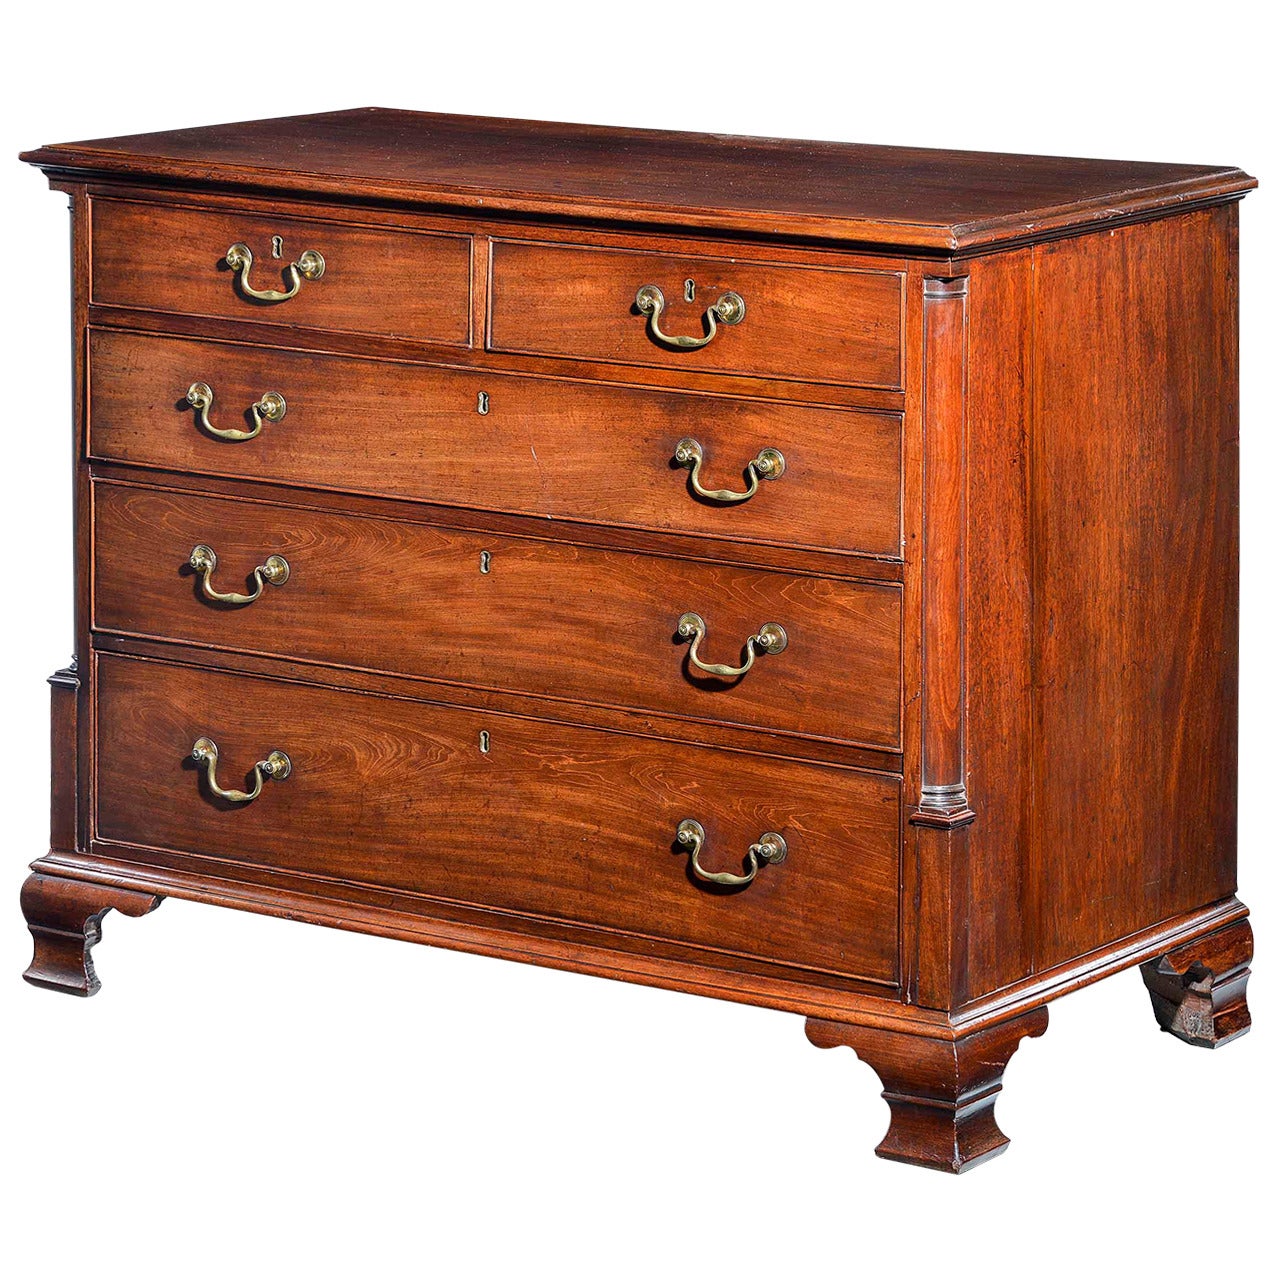 Late 18th Century Mahogany Chest of Drawers